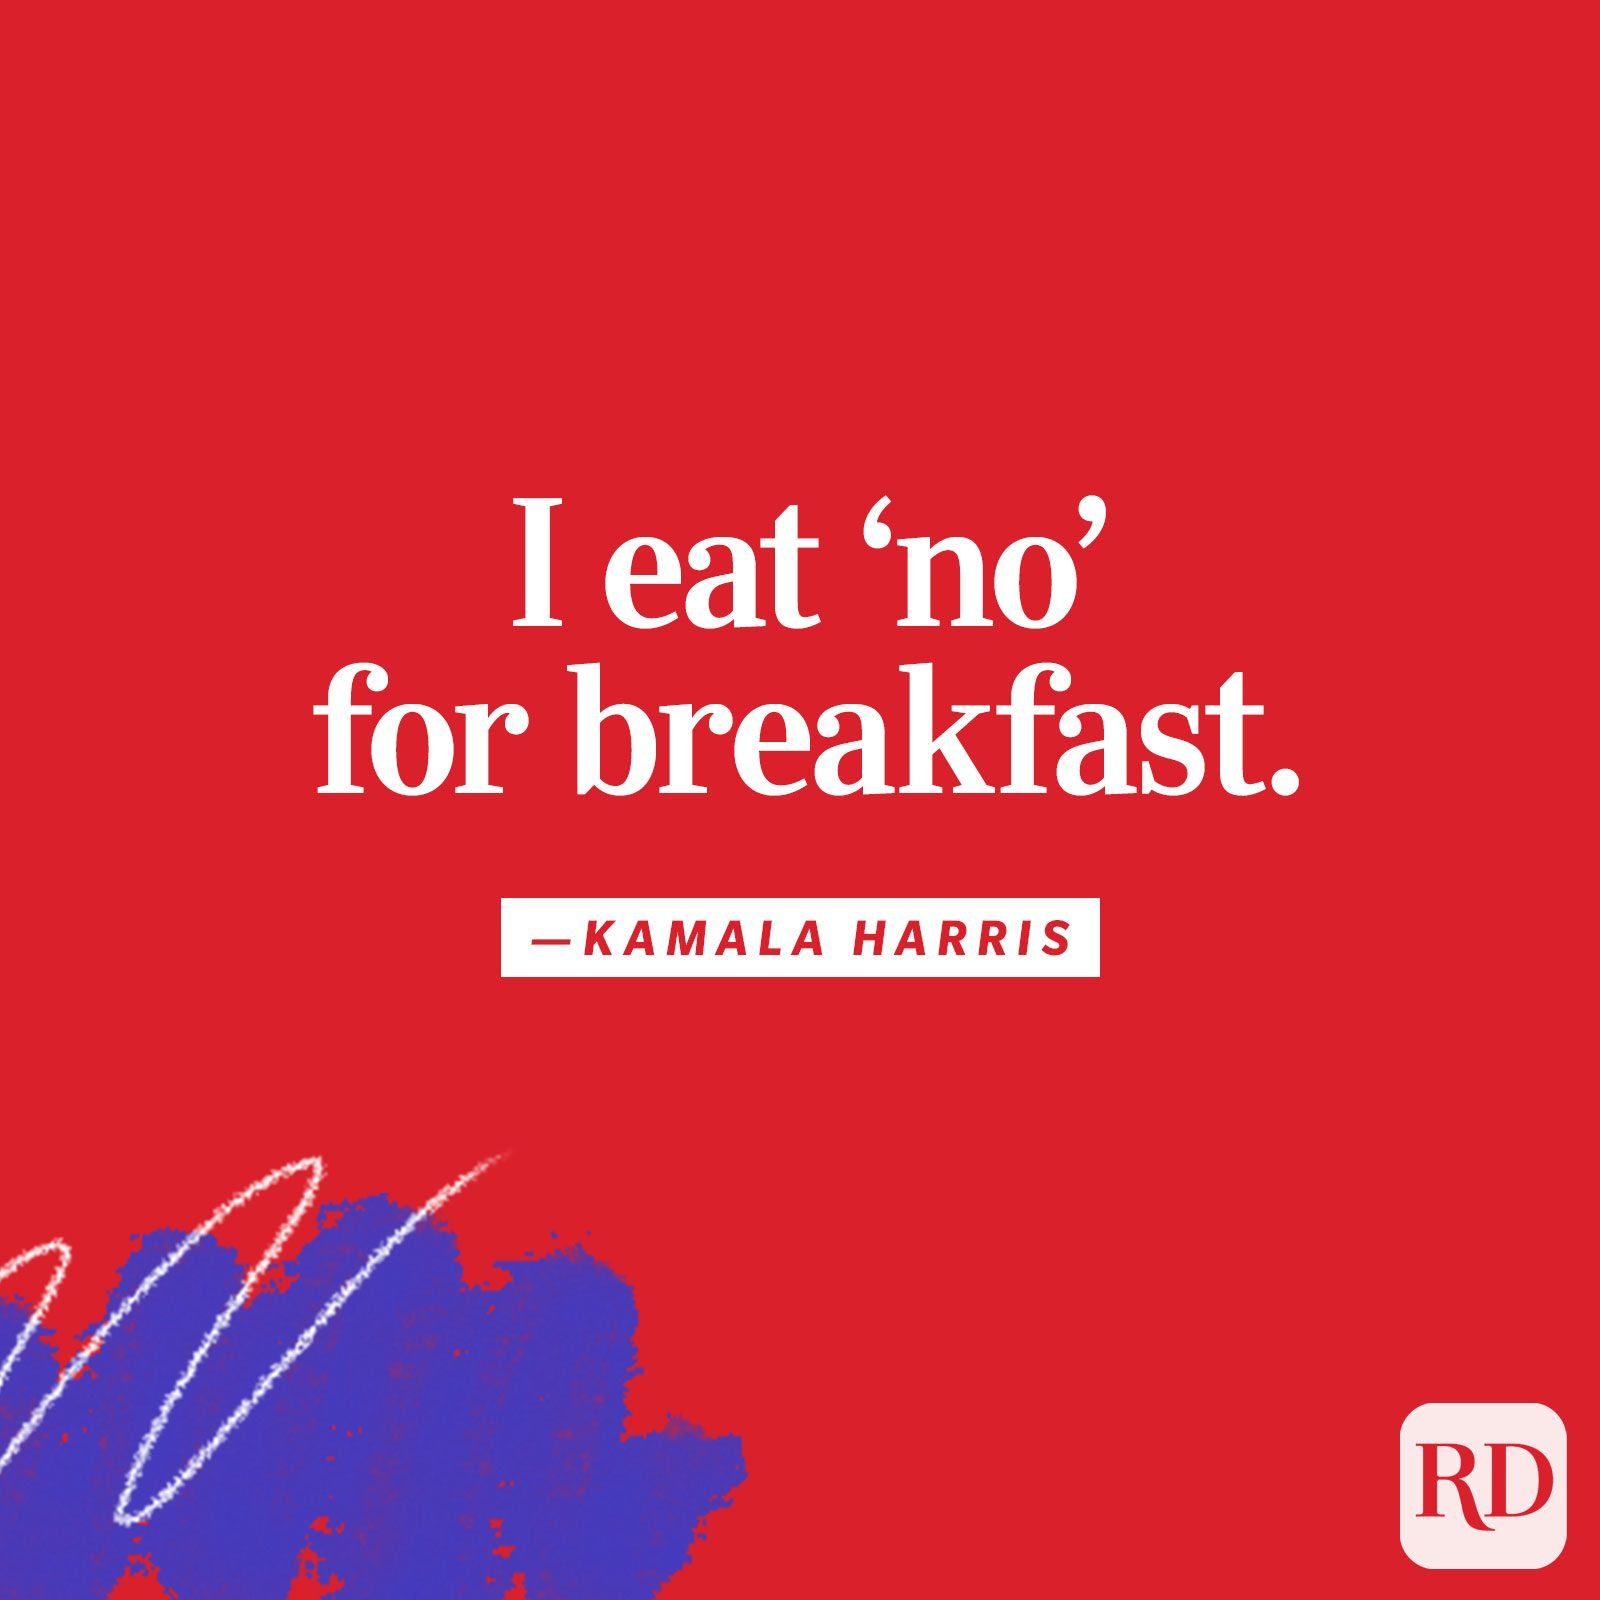 "I eat 'no' for breakfast"